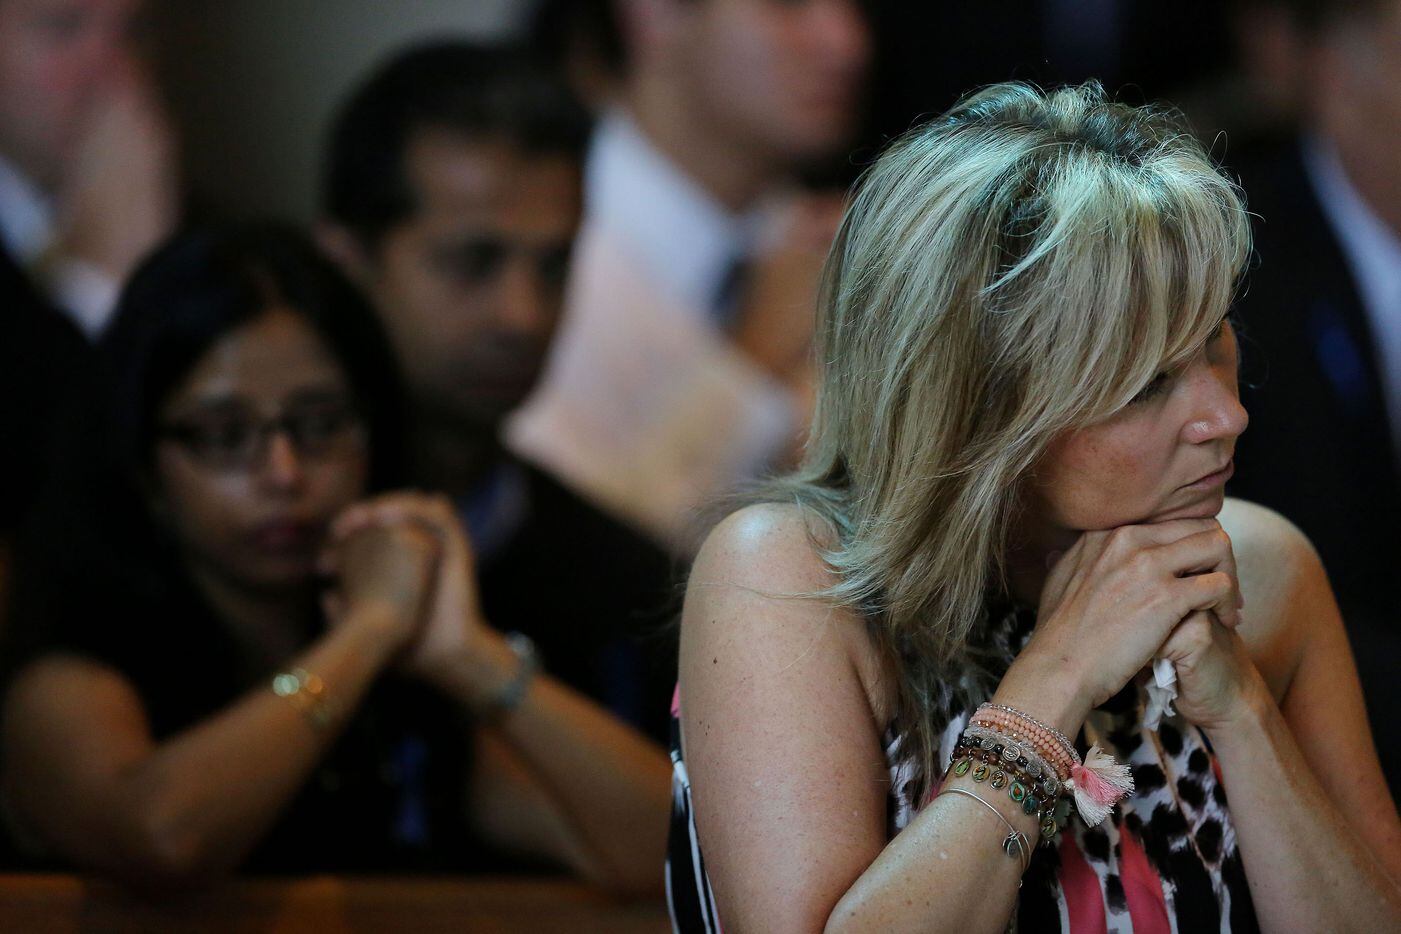 Worshippers mourn during the funeral for Dallas police sergeant Michael Smith.